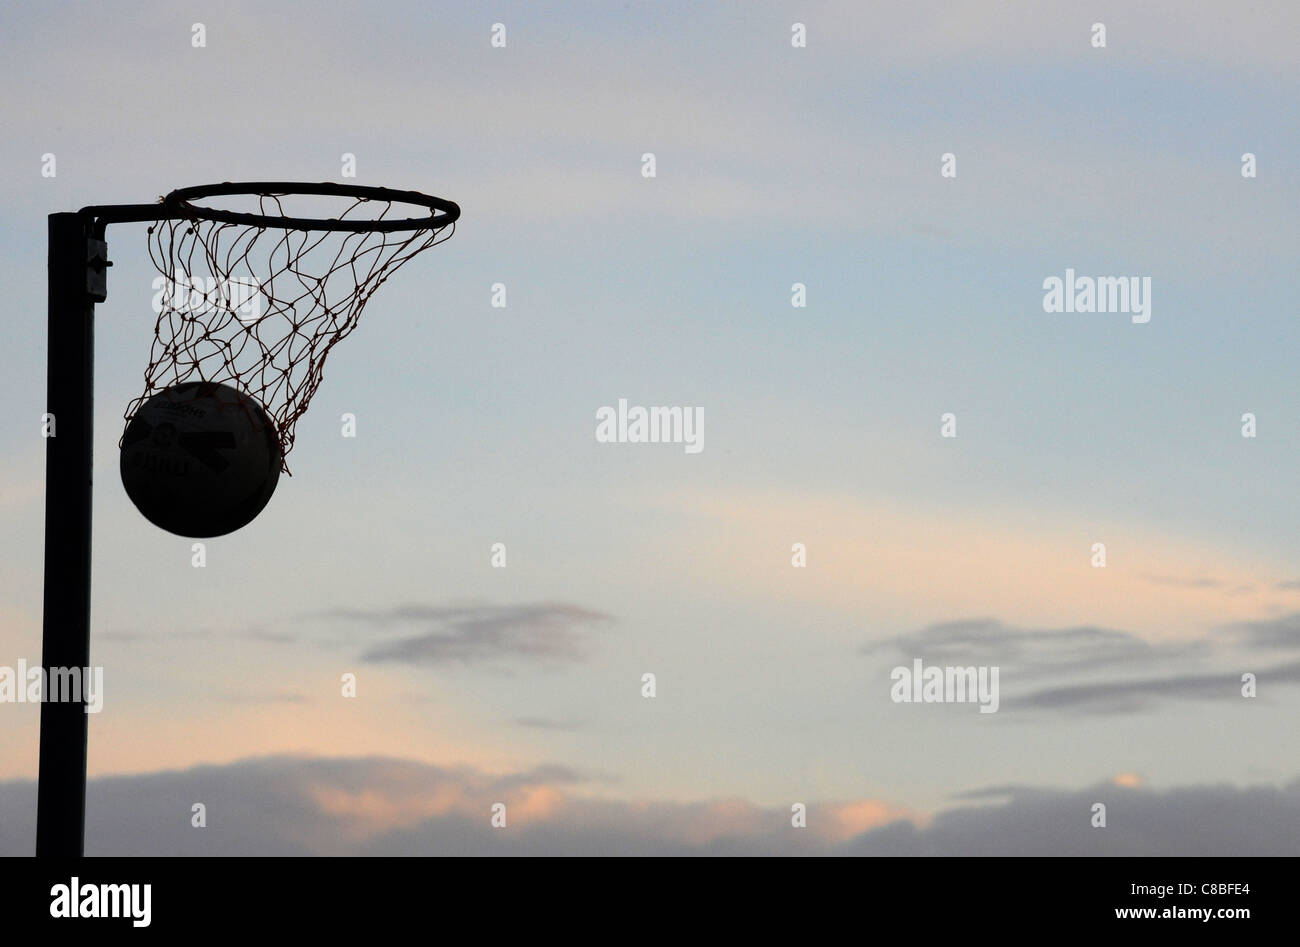 A Silhouette of a Netball going through a hoop with no players at dusk. Stock Photo